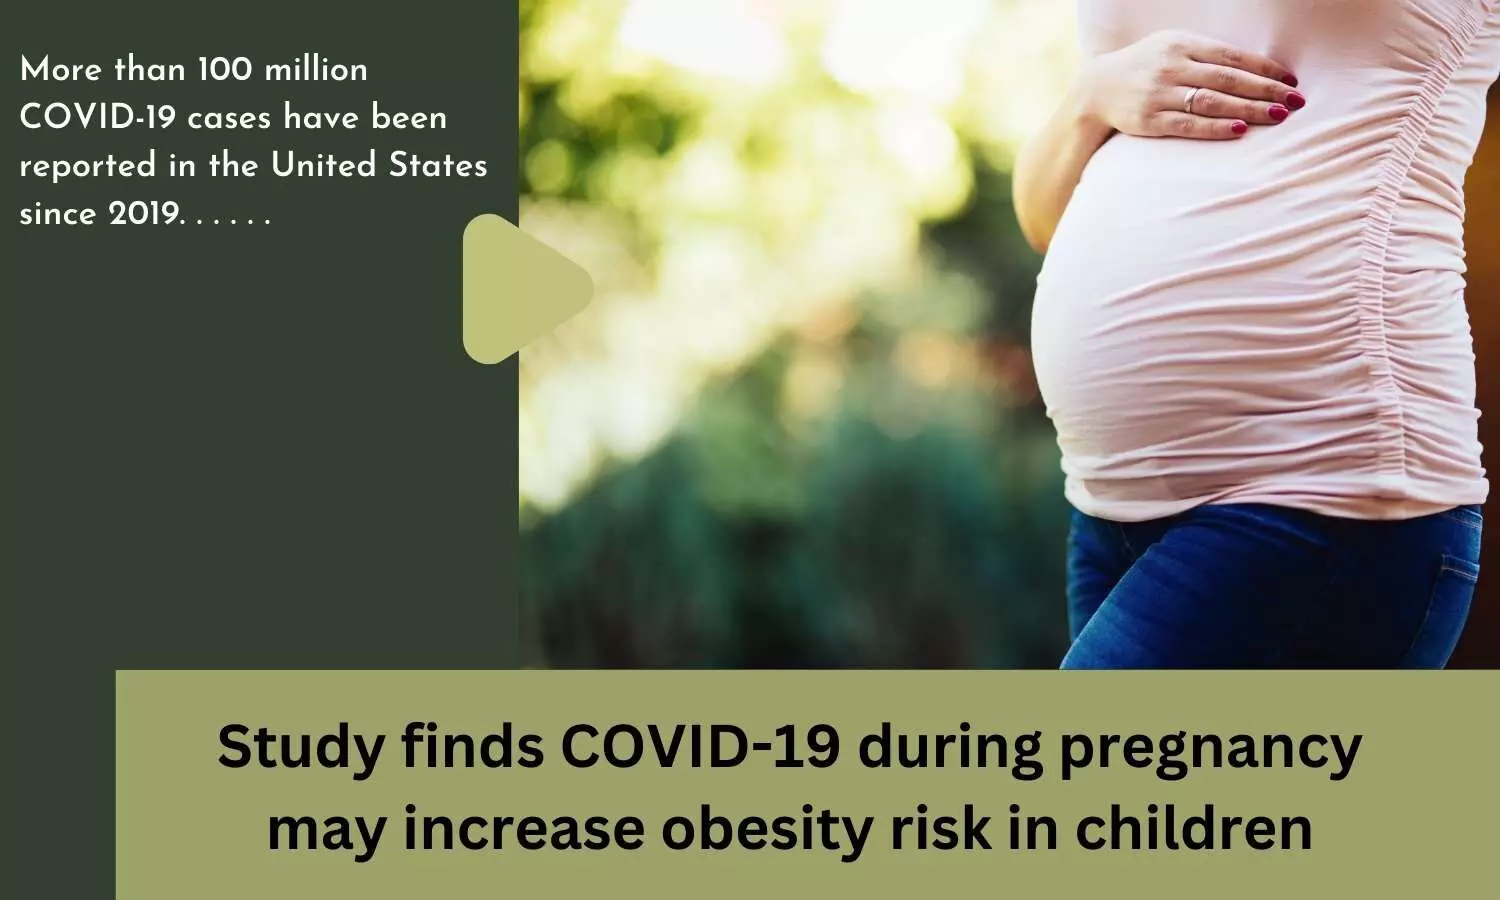 Study finds COVID-19 during pregnancy may increase obesity risk in children